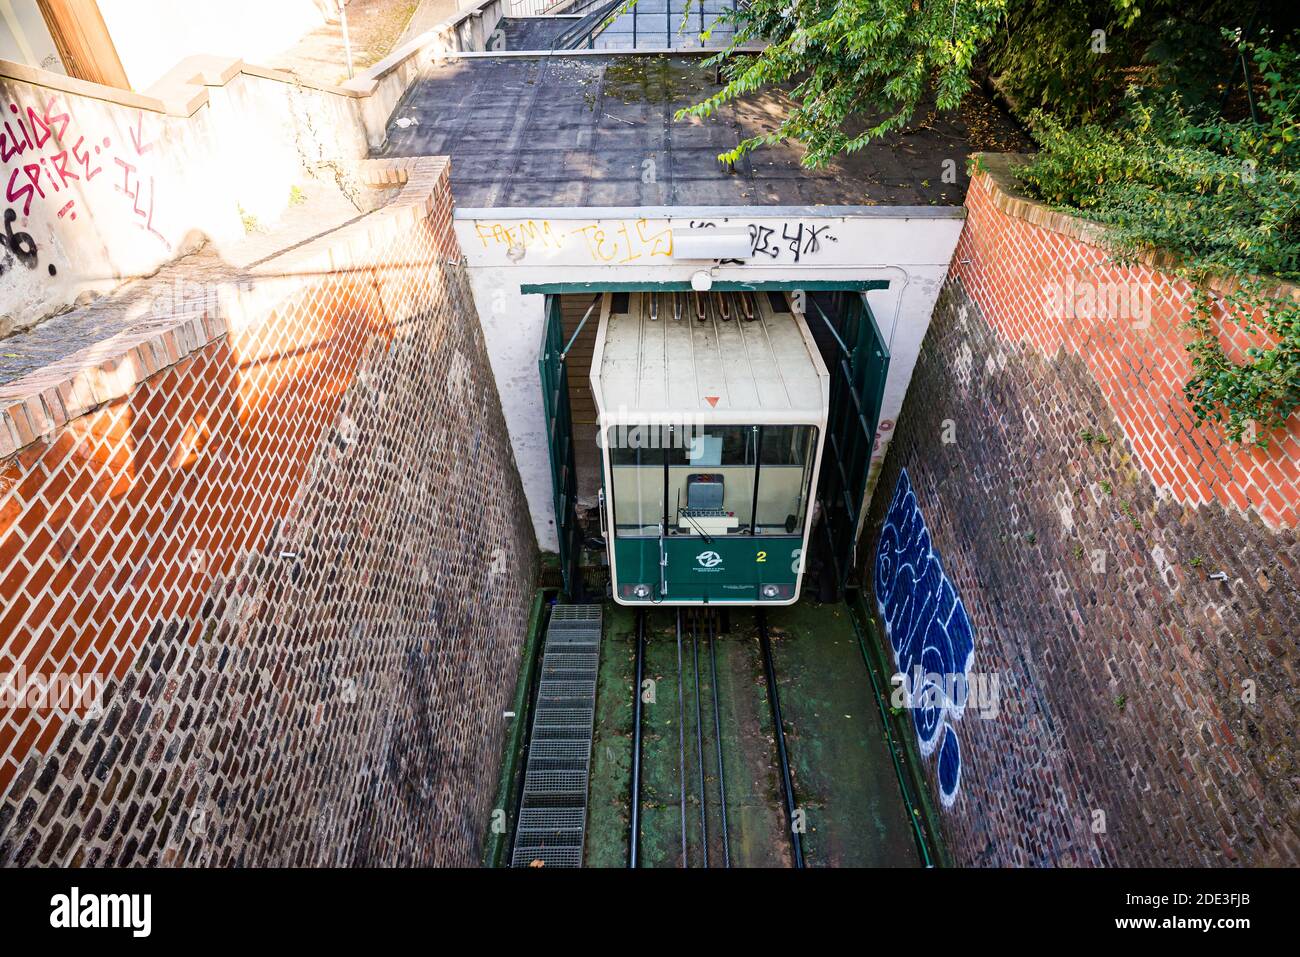 Prague, Czech republic - September 19, 2020. Funicular from Ujezd to the Petrin hill as a part of public transportation Stock Photo